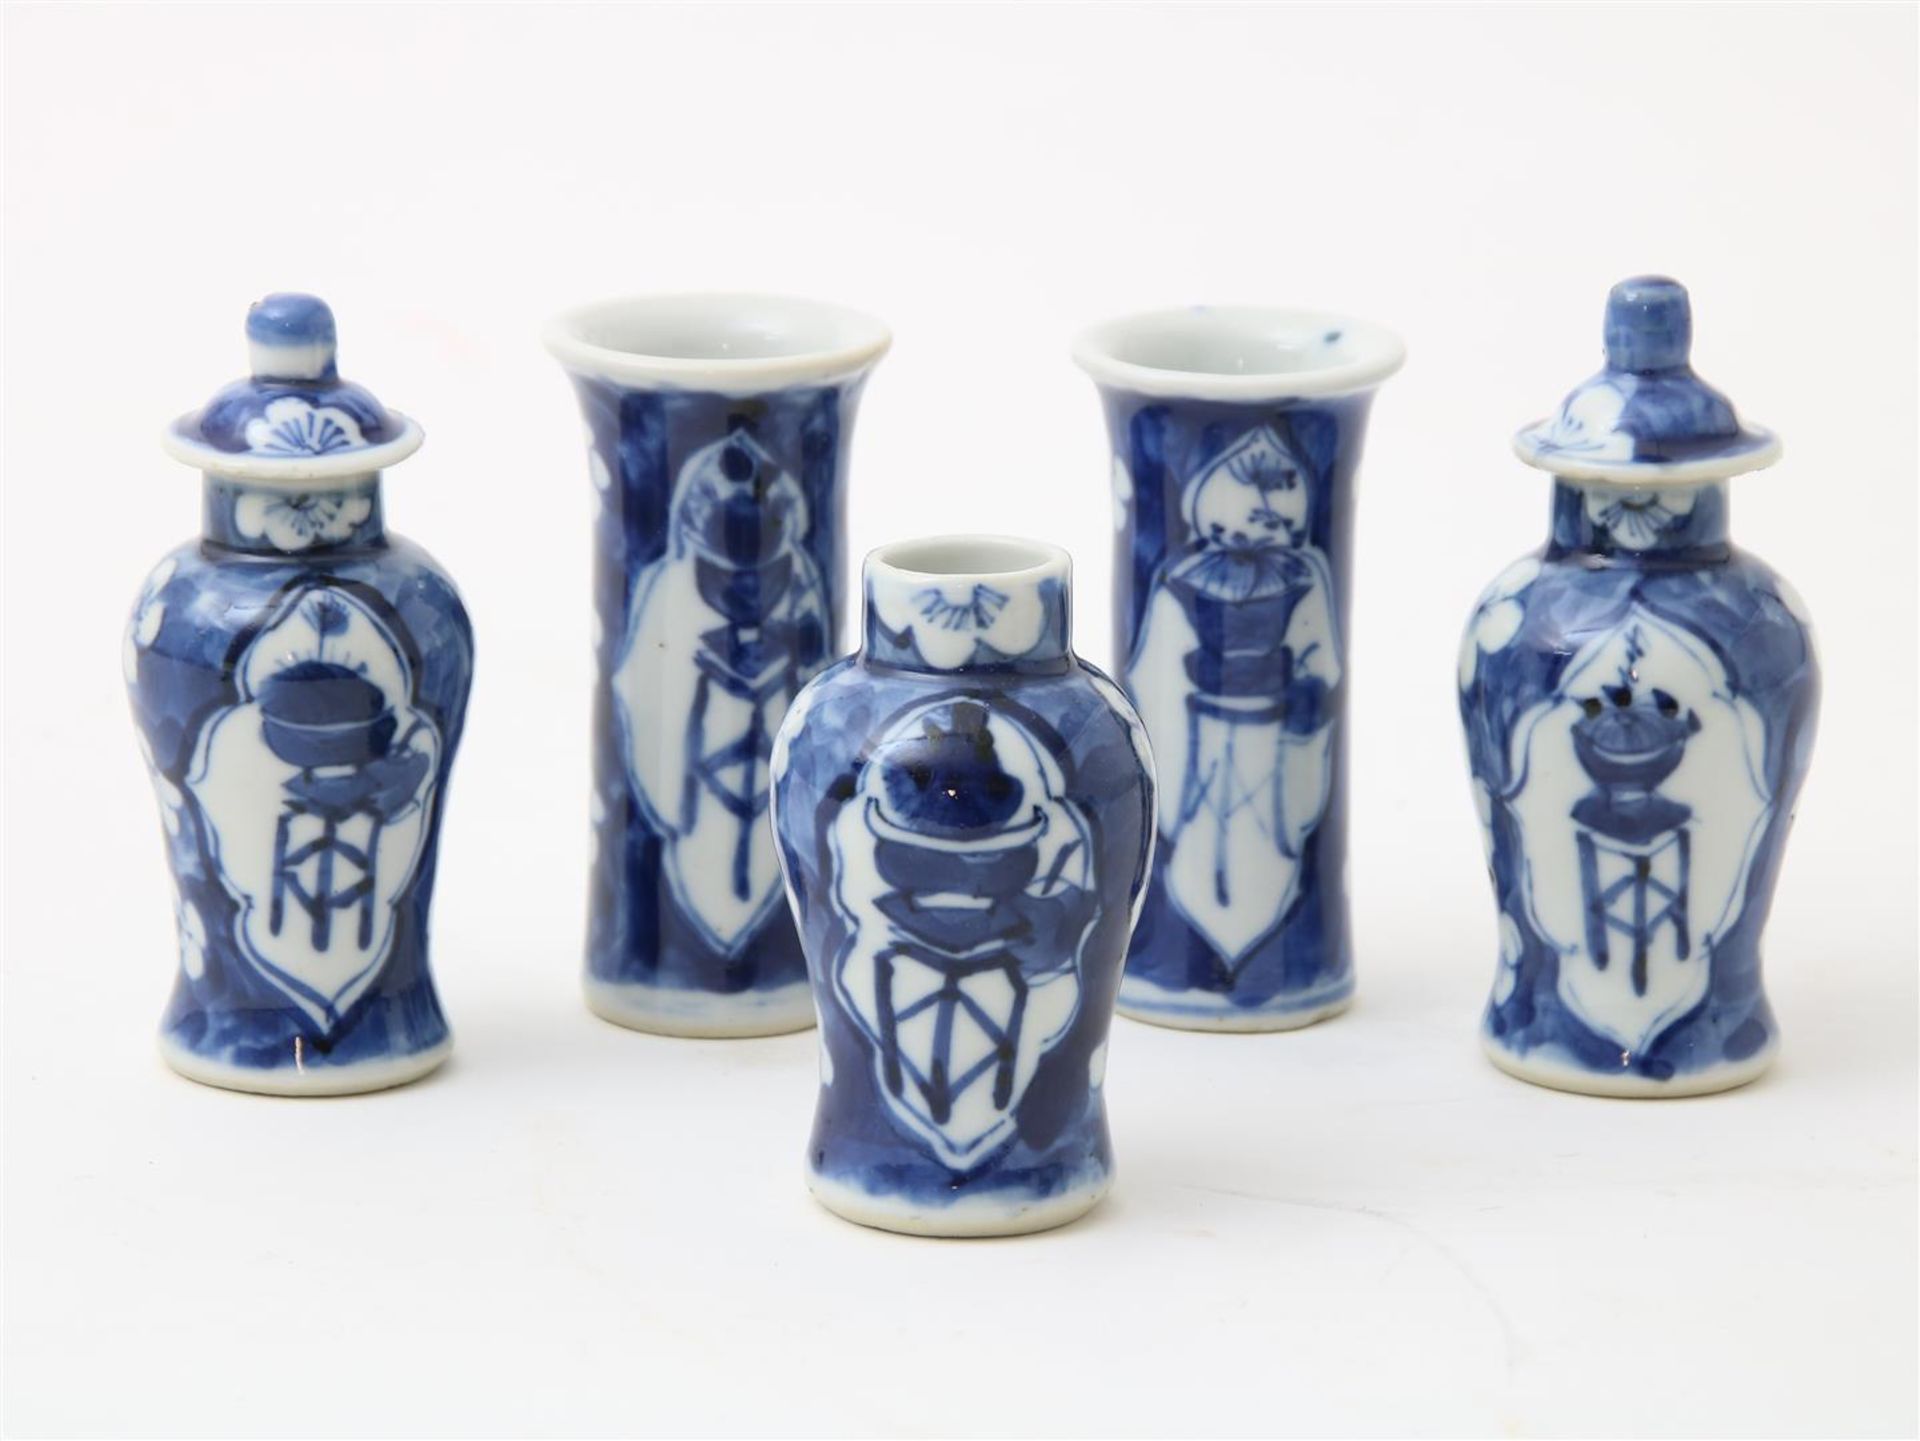 Porcelain miniature cupboard set, lidded vases and 2 tube vases decorated with cracked ice decor and